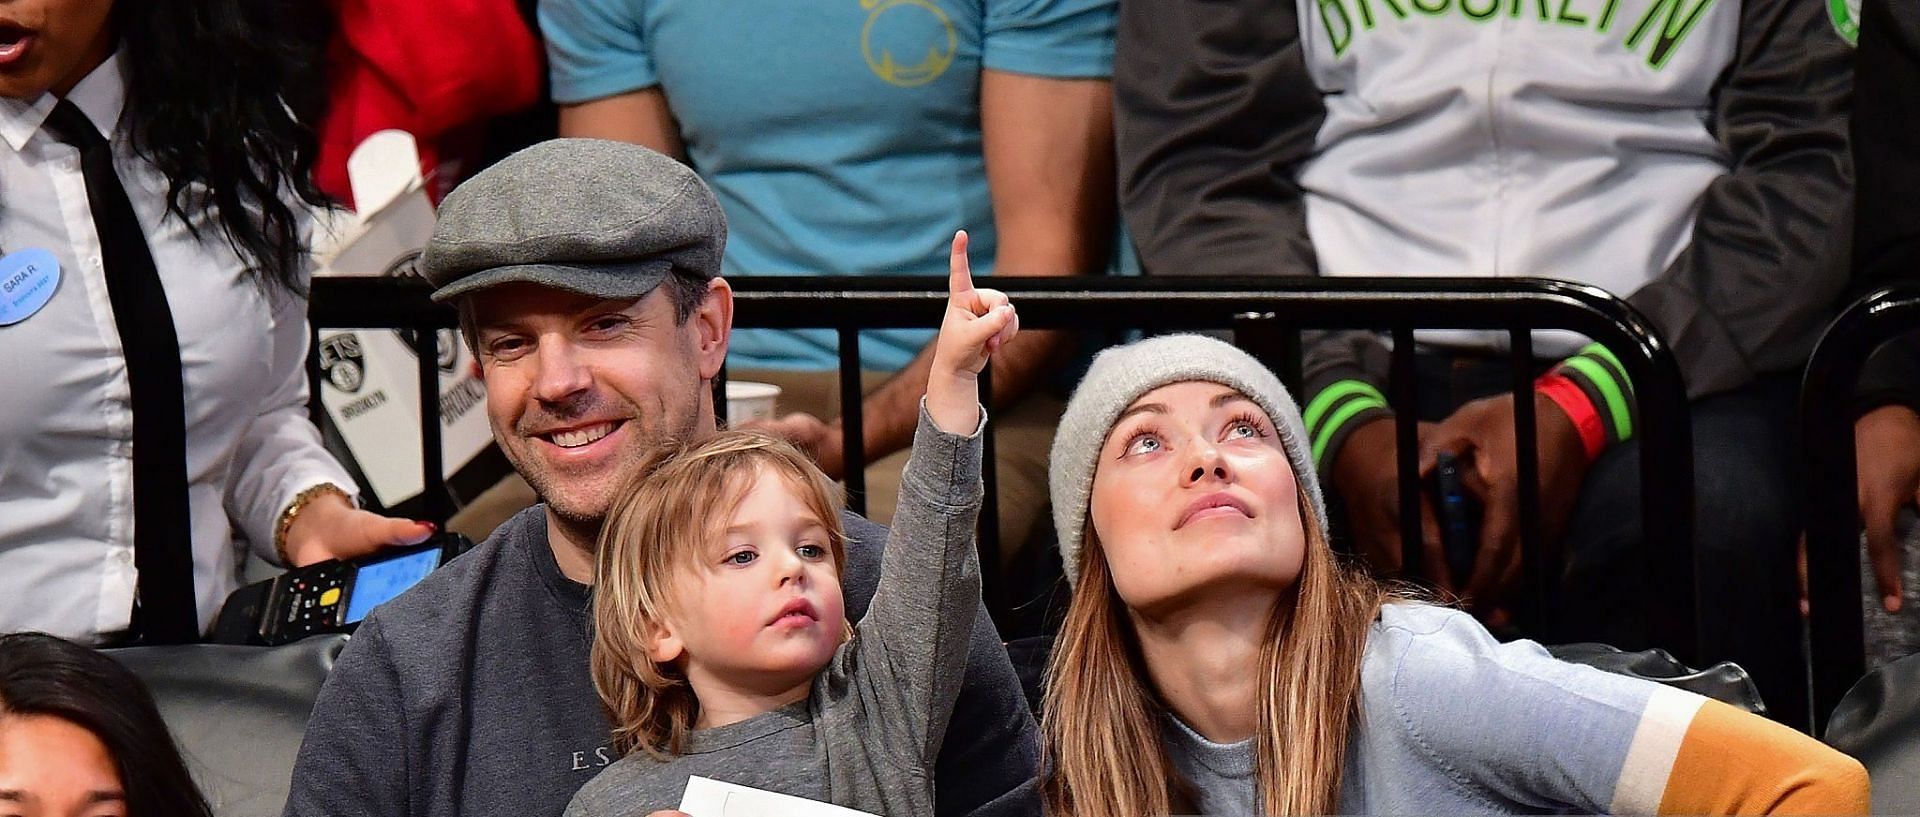 Olivia Wilde and Jason Sudeikis are currently in the middle of a custody battle involving their two children (Image via Getty Images)